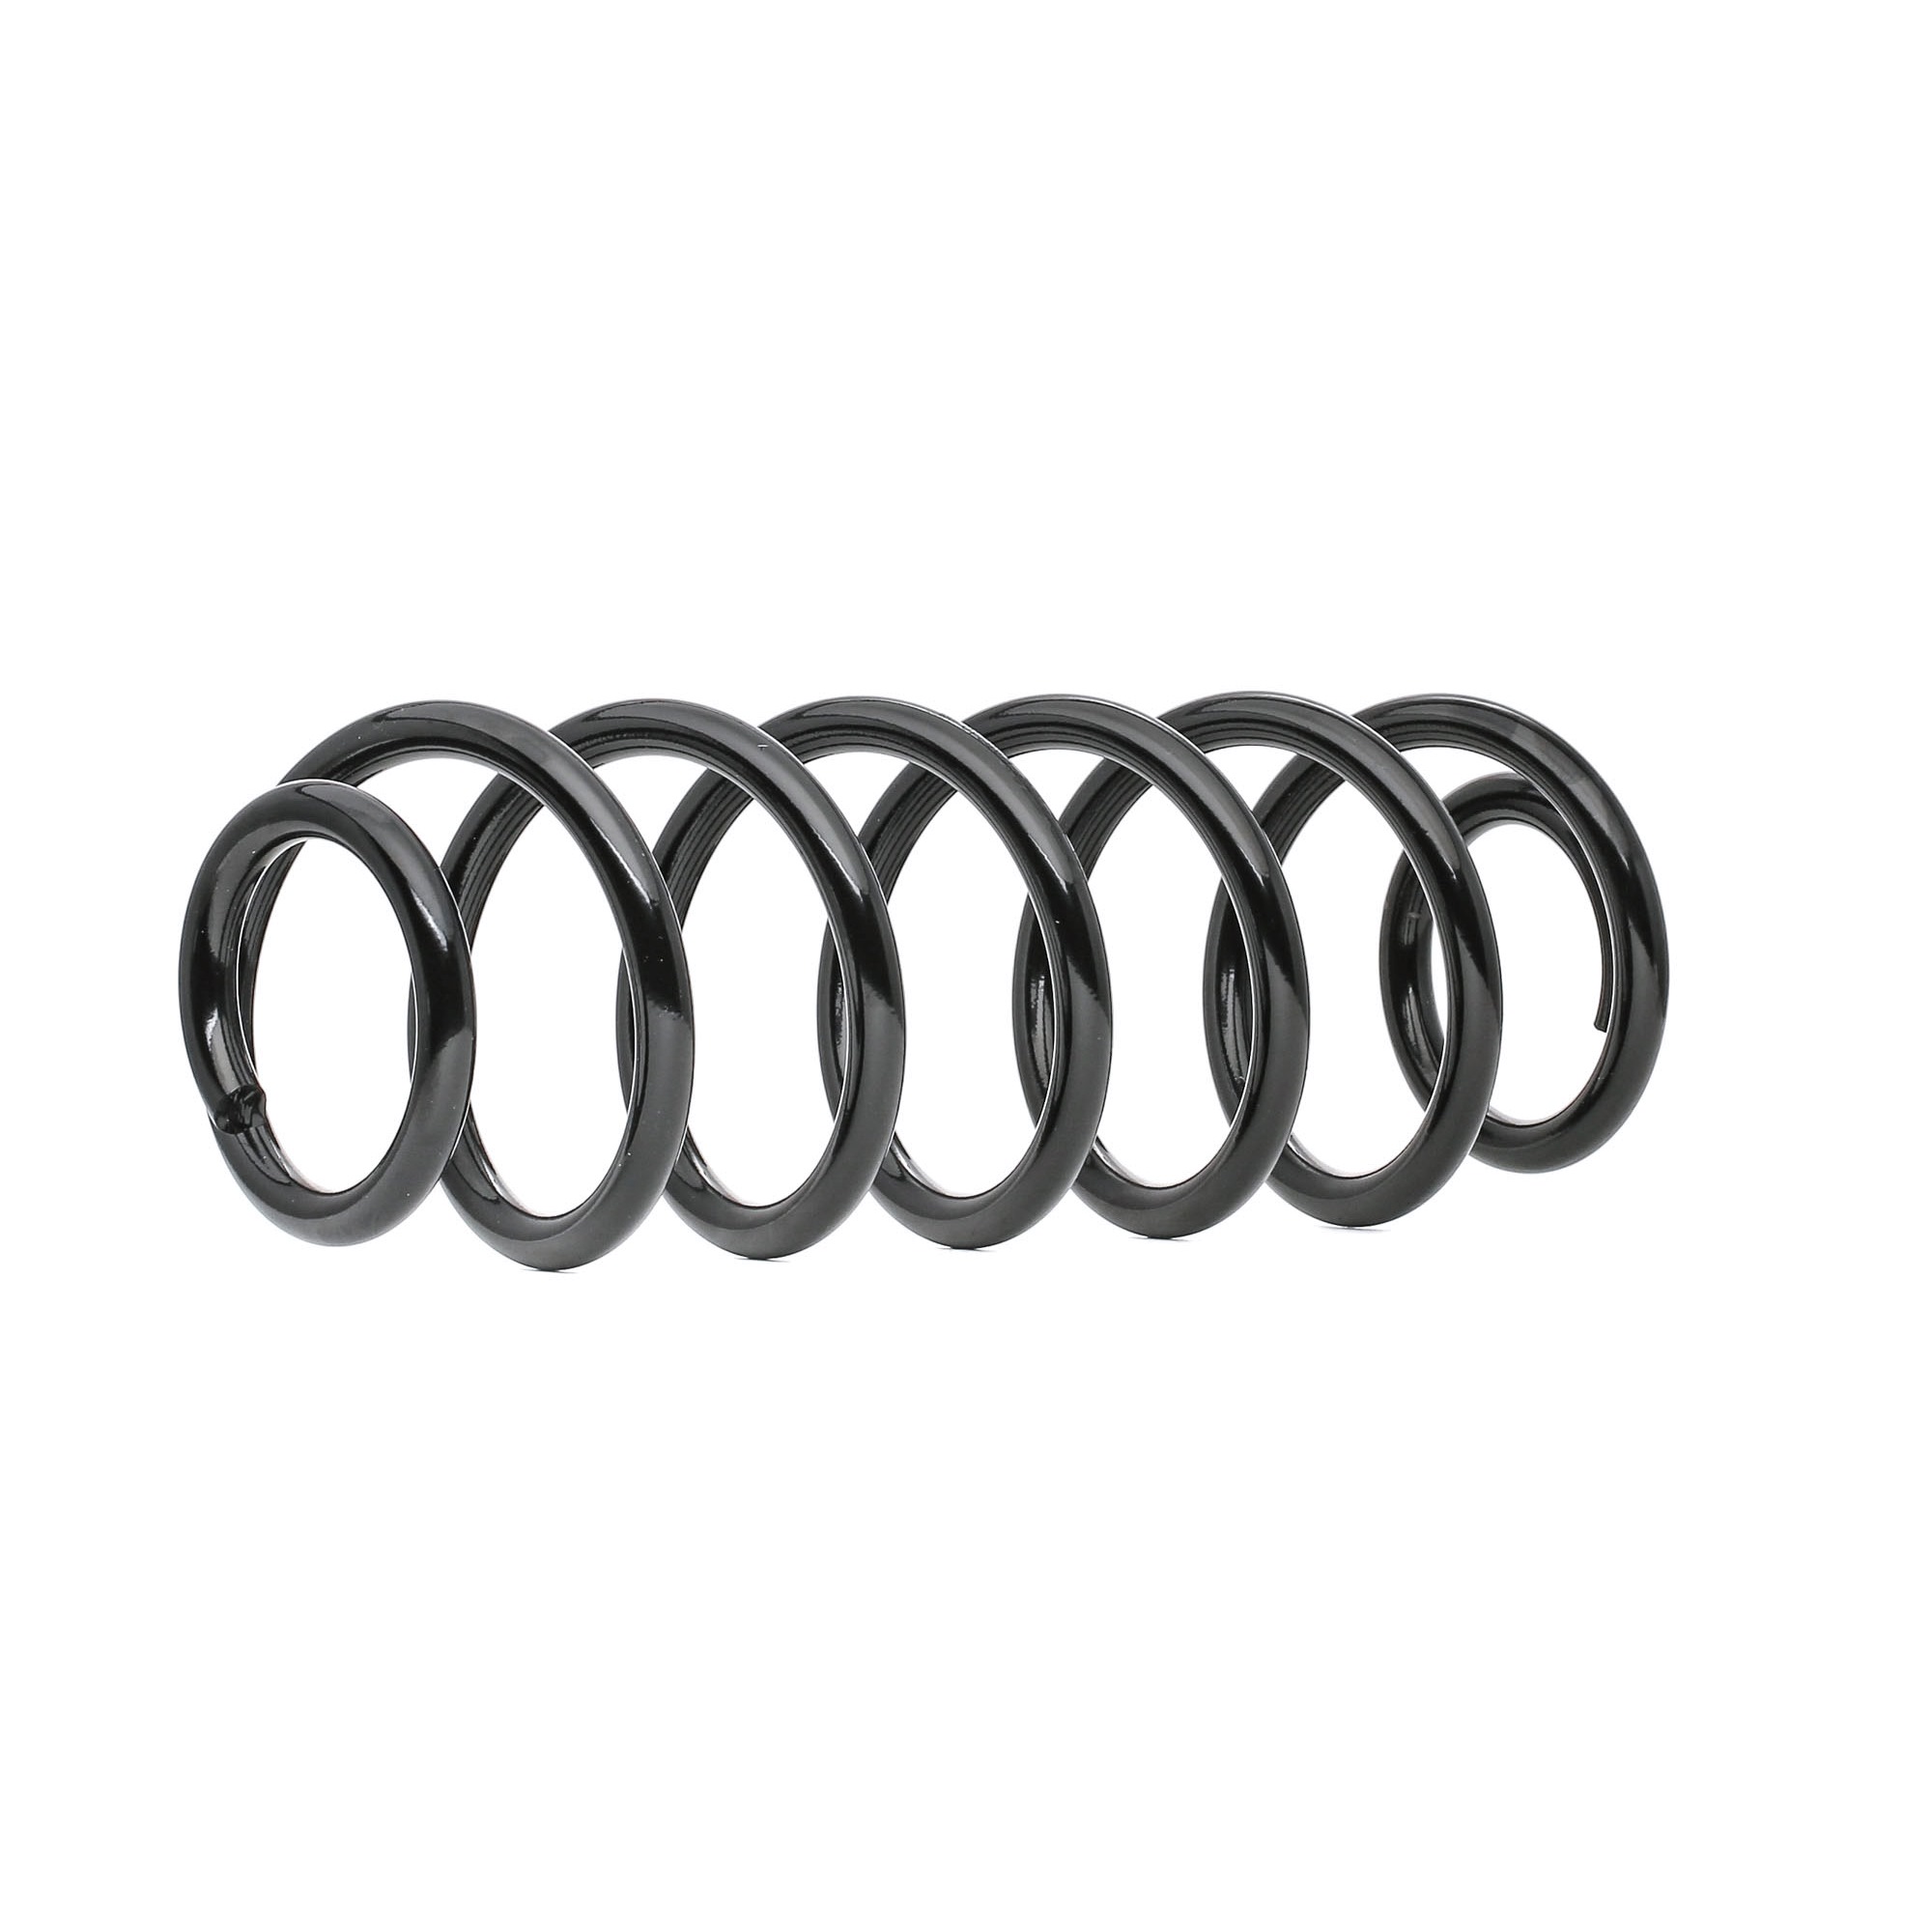 KYB Springs rear and front VW Golf 5 (1K1) new RA6240